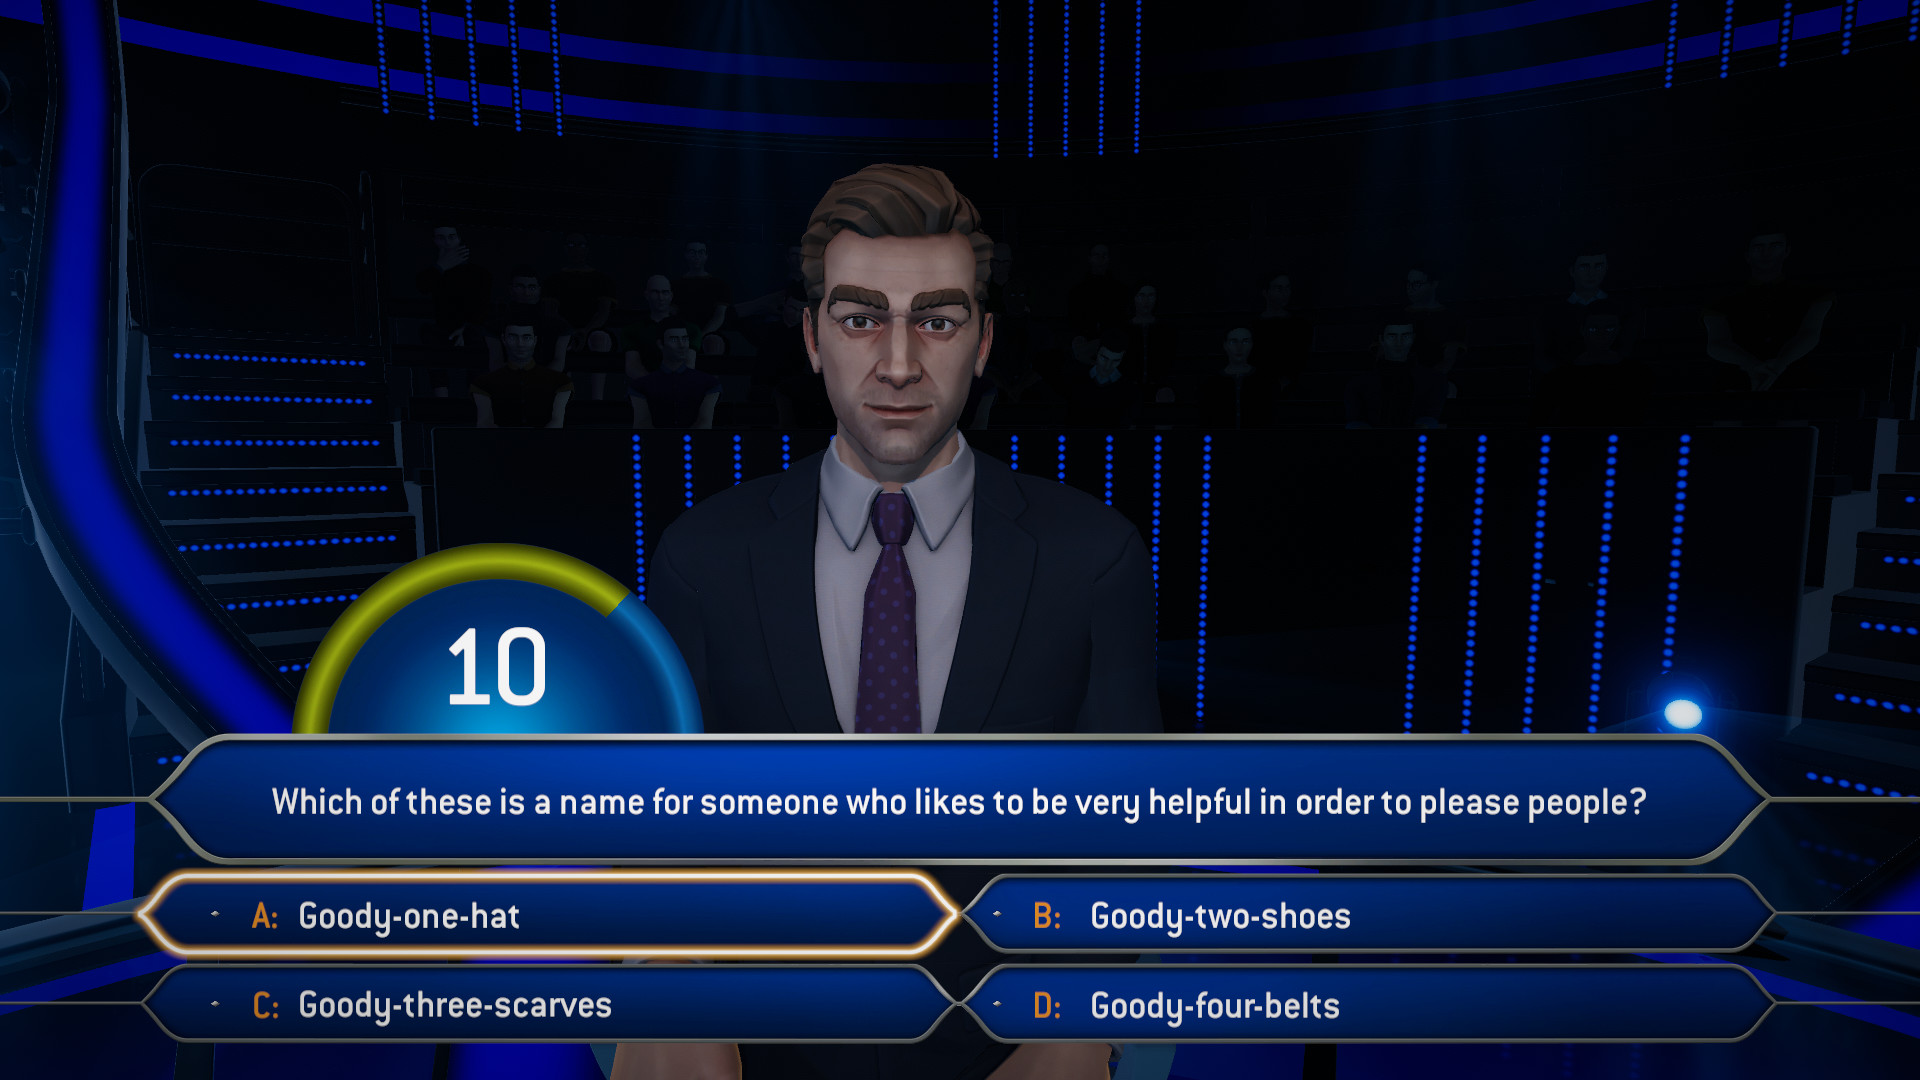 Who Wants To Be A Millionaire Free Download